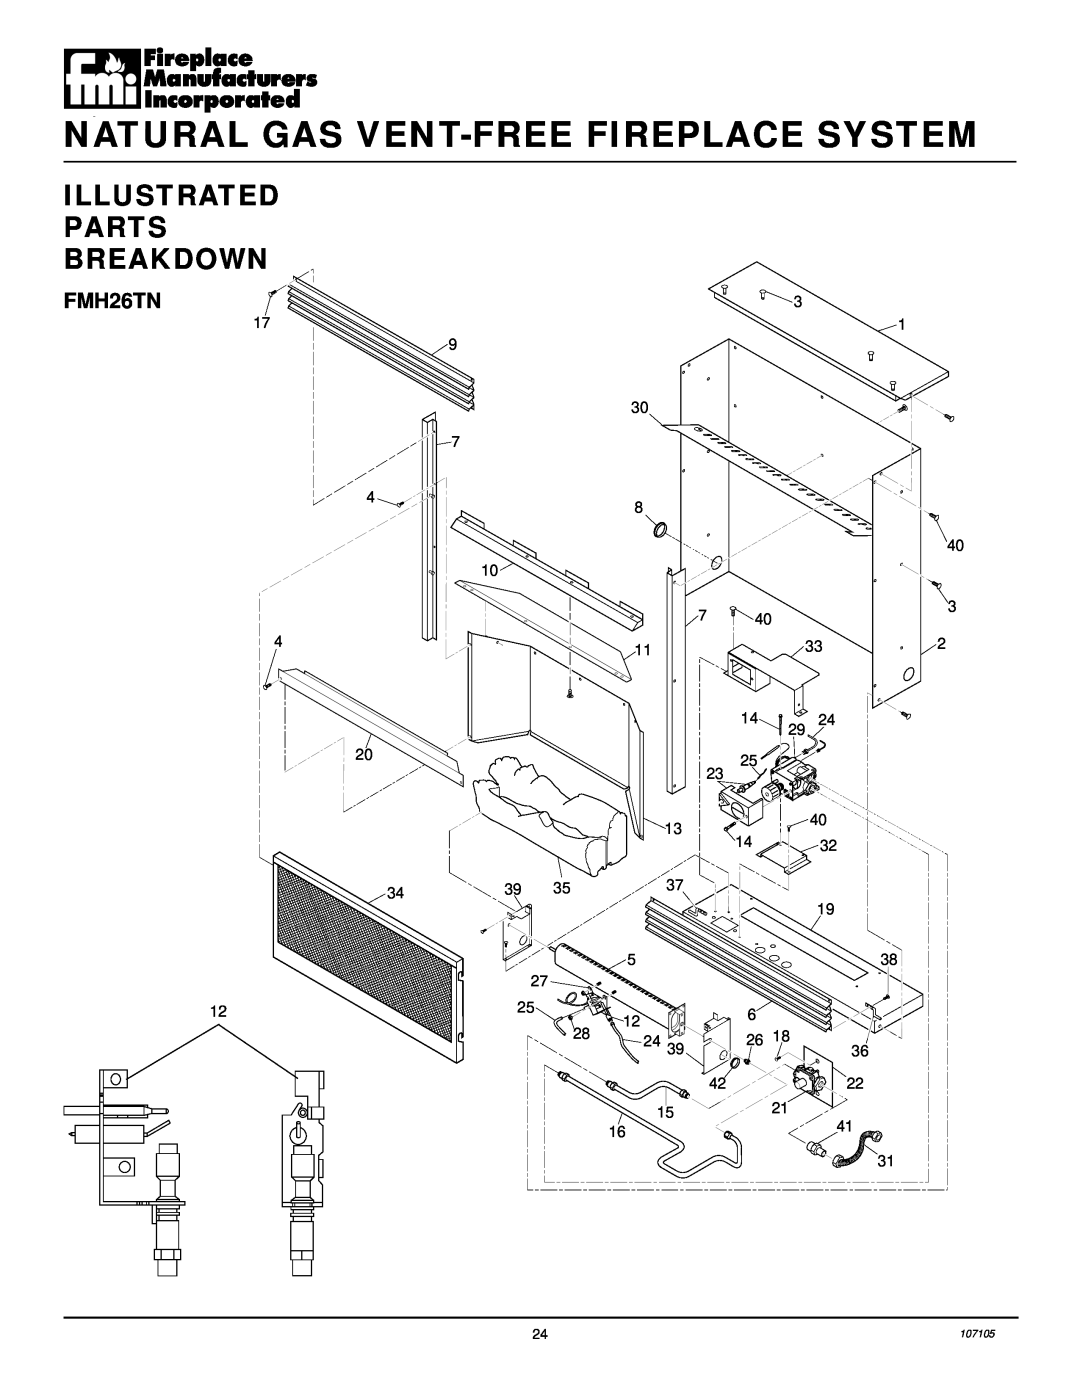 Desa FMH26TN 14 installation manual Illustrated Parts Breakdown, Natural Gas Vent-Freefireplace System 